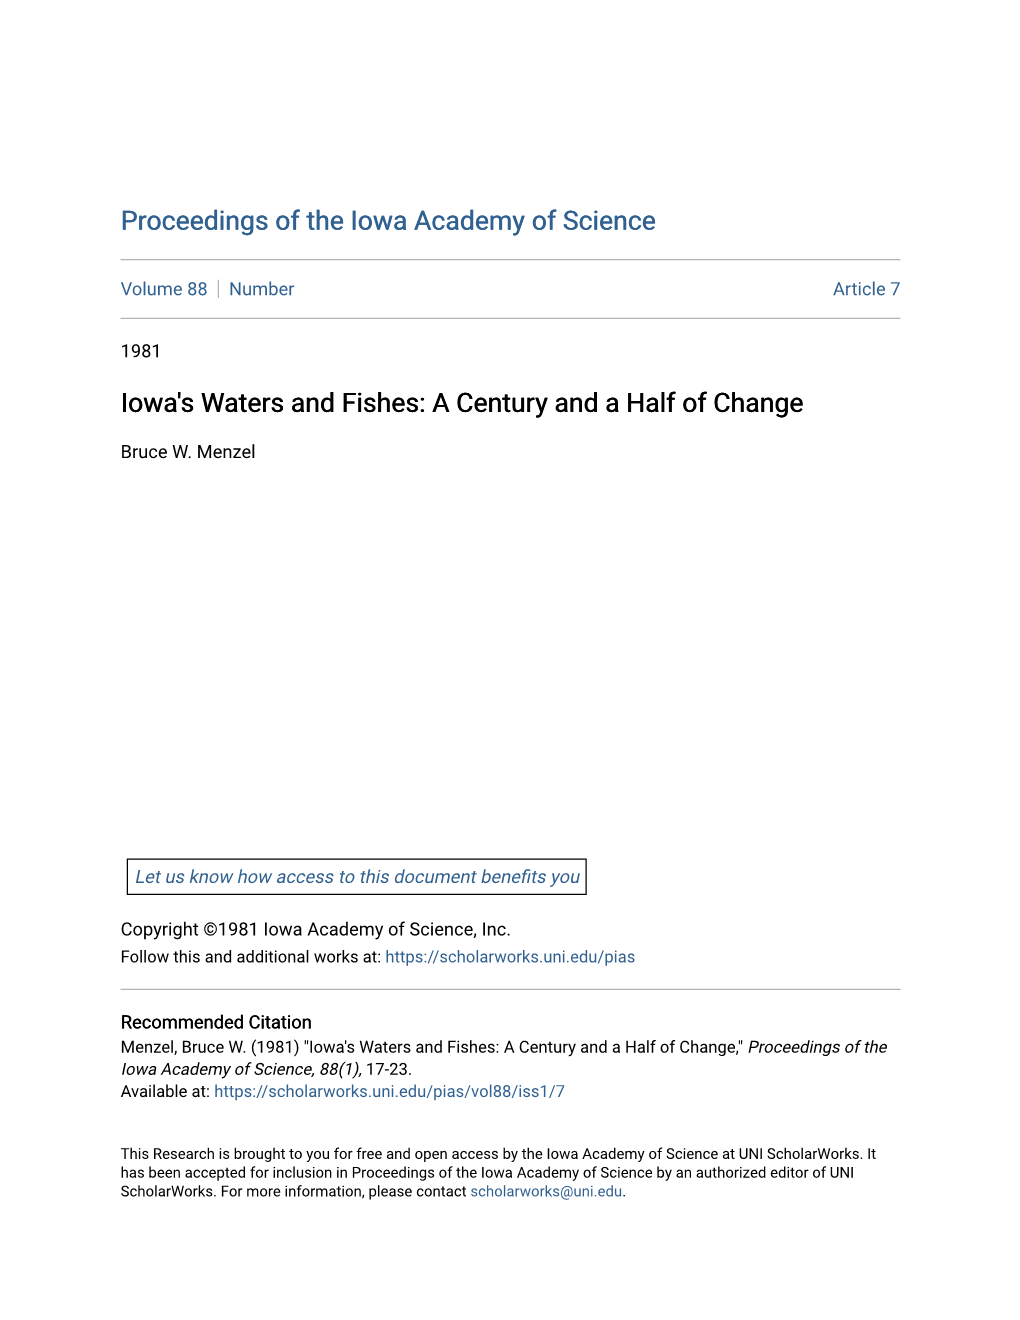 Iowa's Waters and Fishes: a Century and a Half of Change